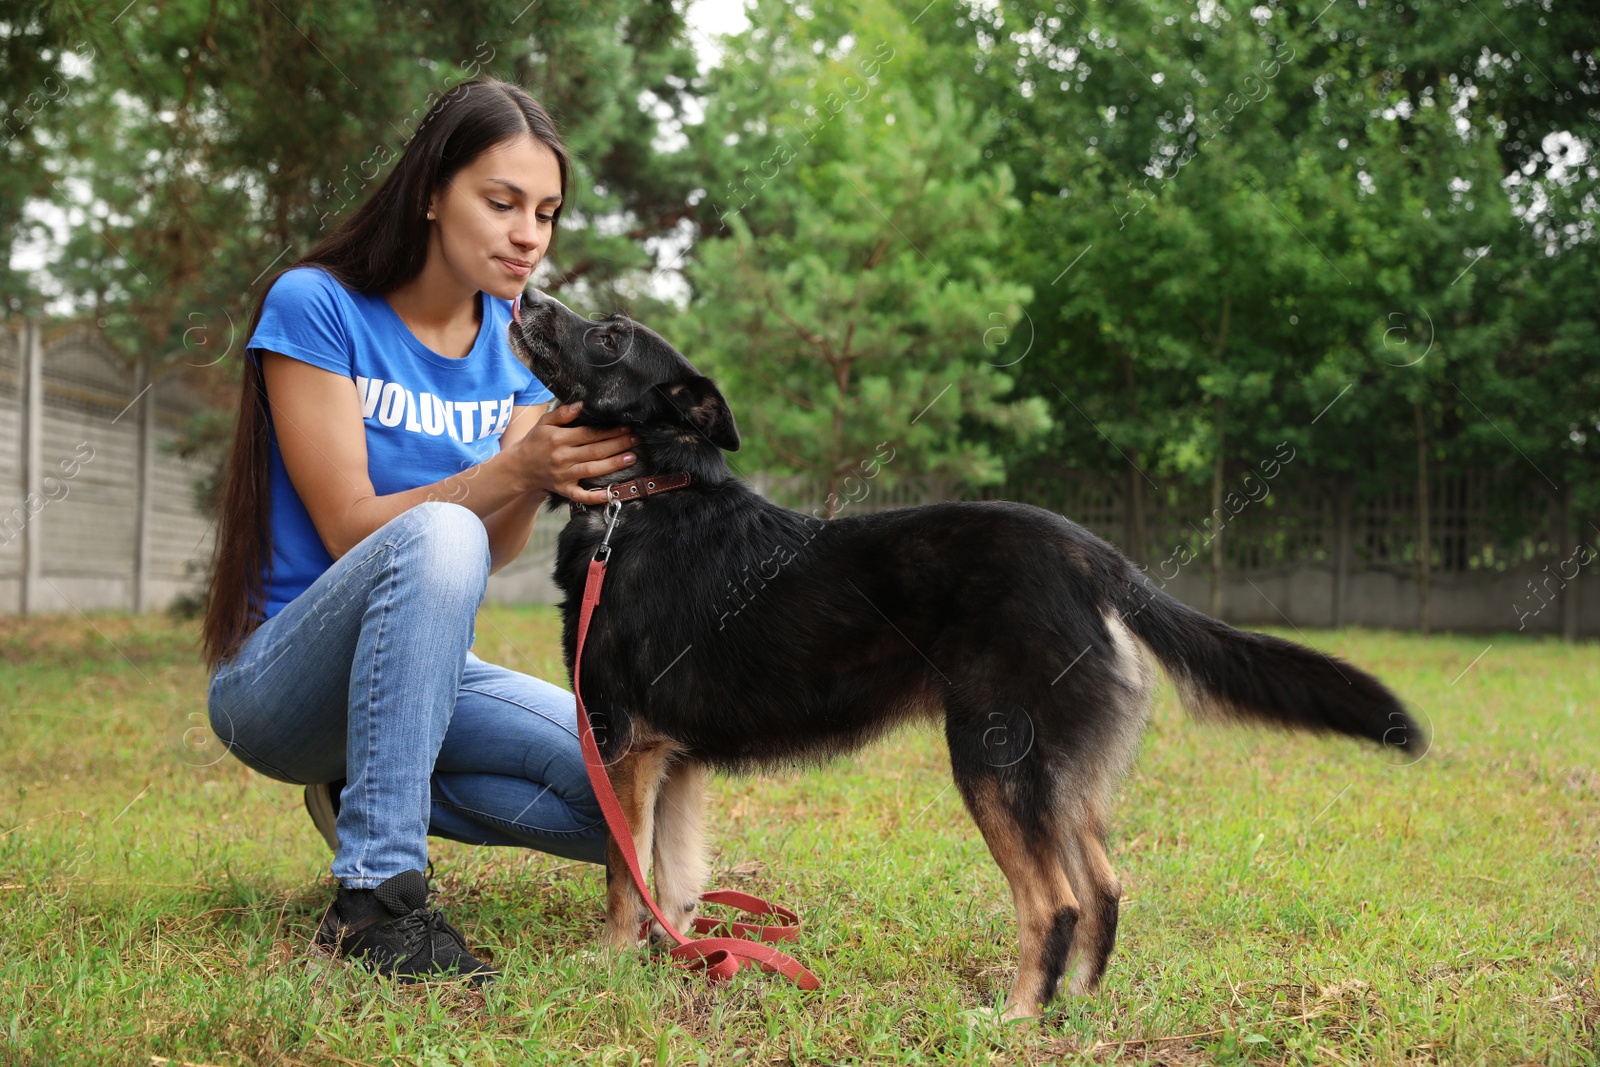 Photo of Female volunteer with homeless dog at animal shelter outdoors